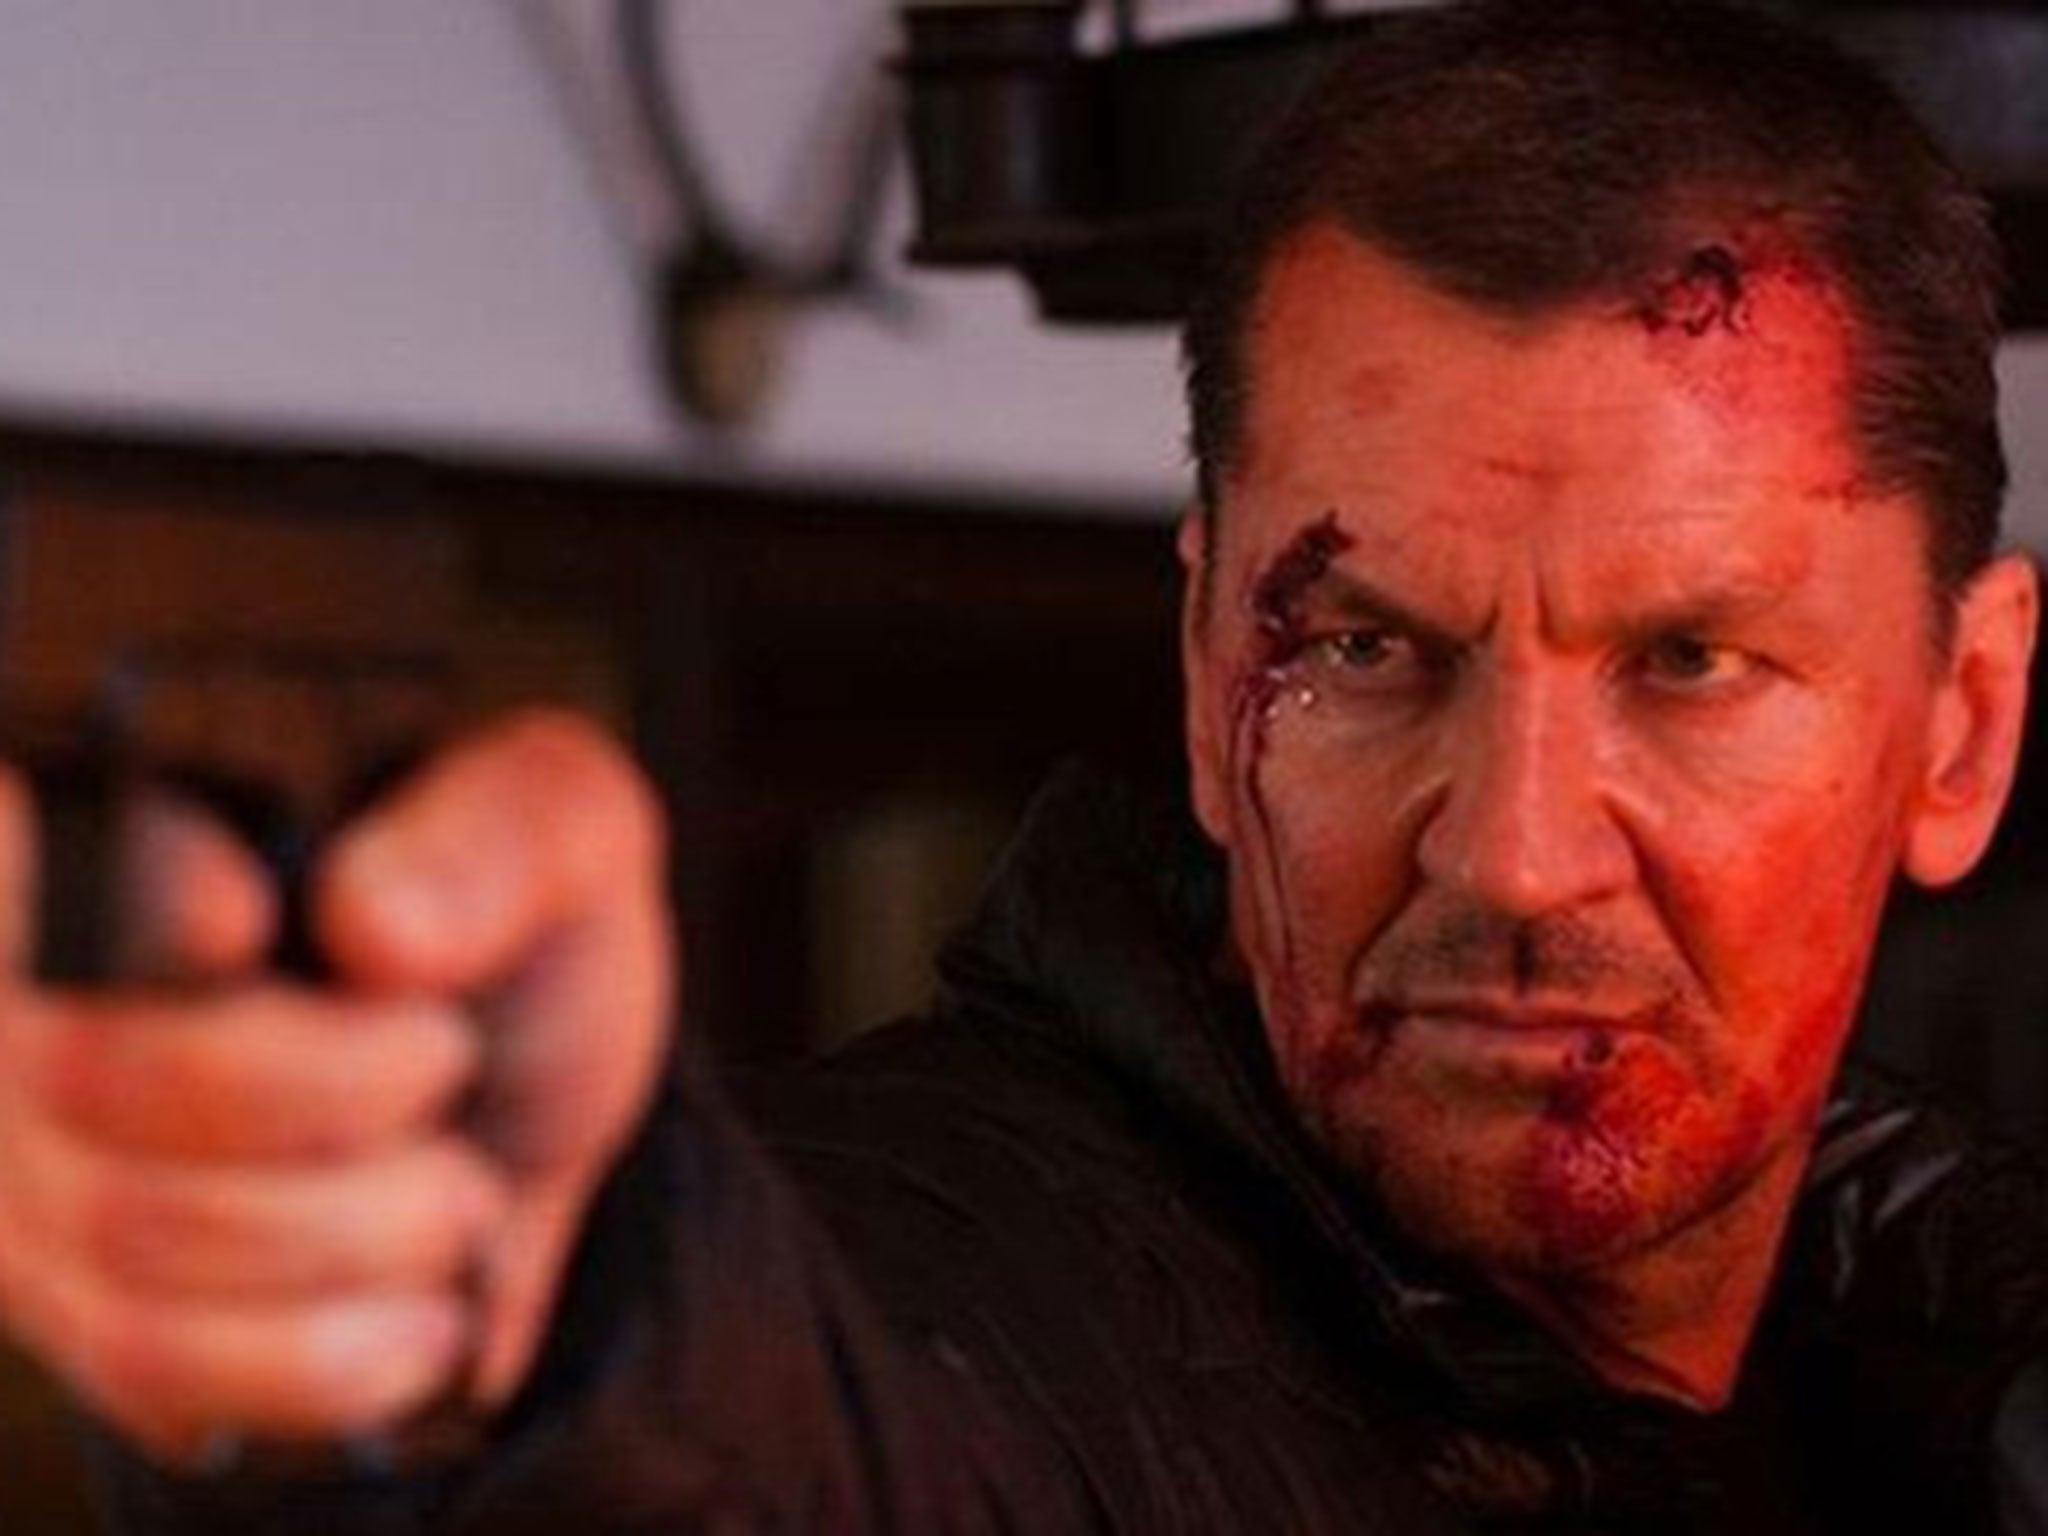 Craig Fairbrass comments on rumours suggesting he's returning as